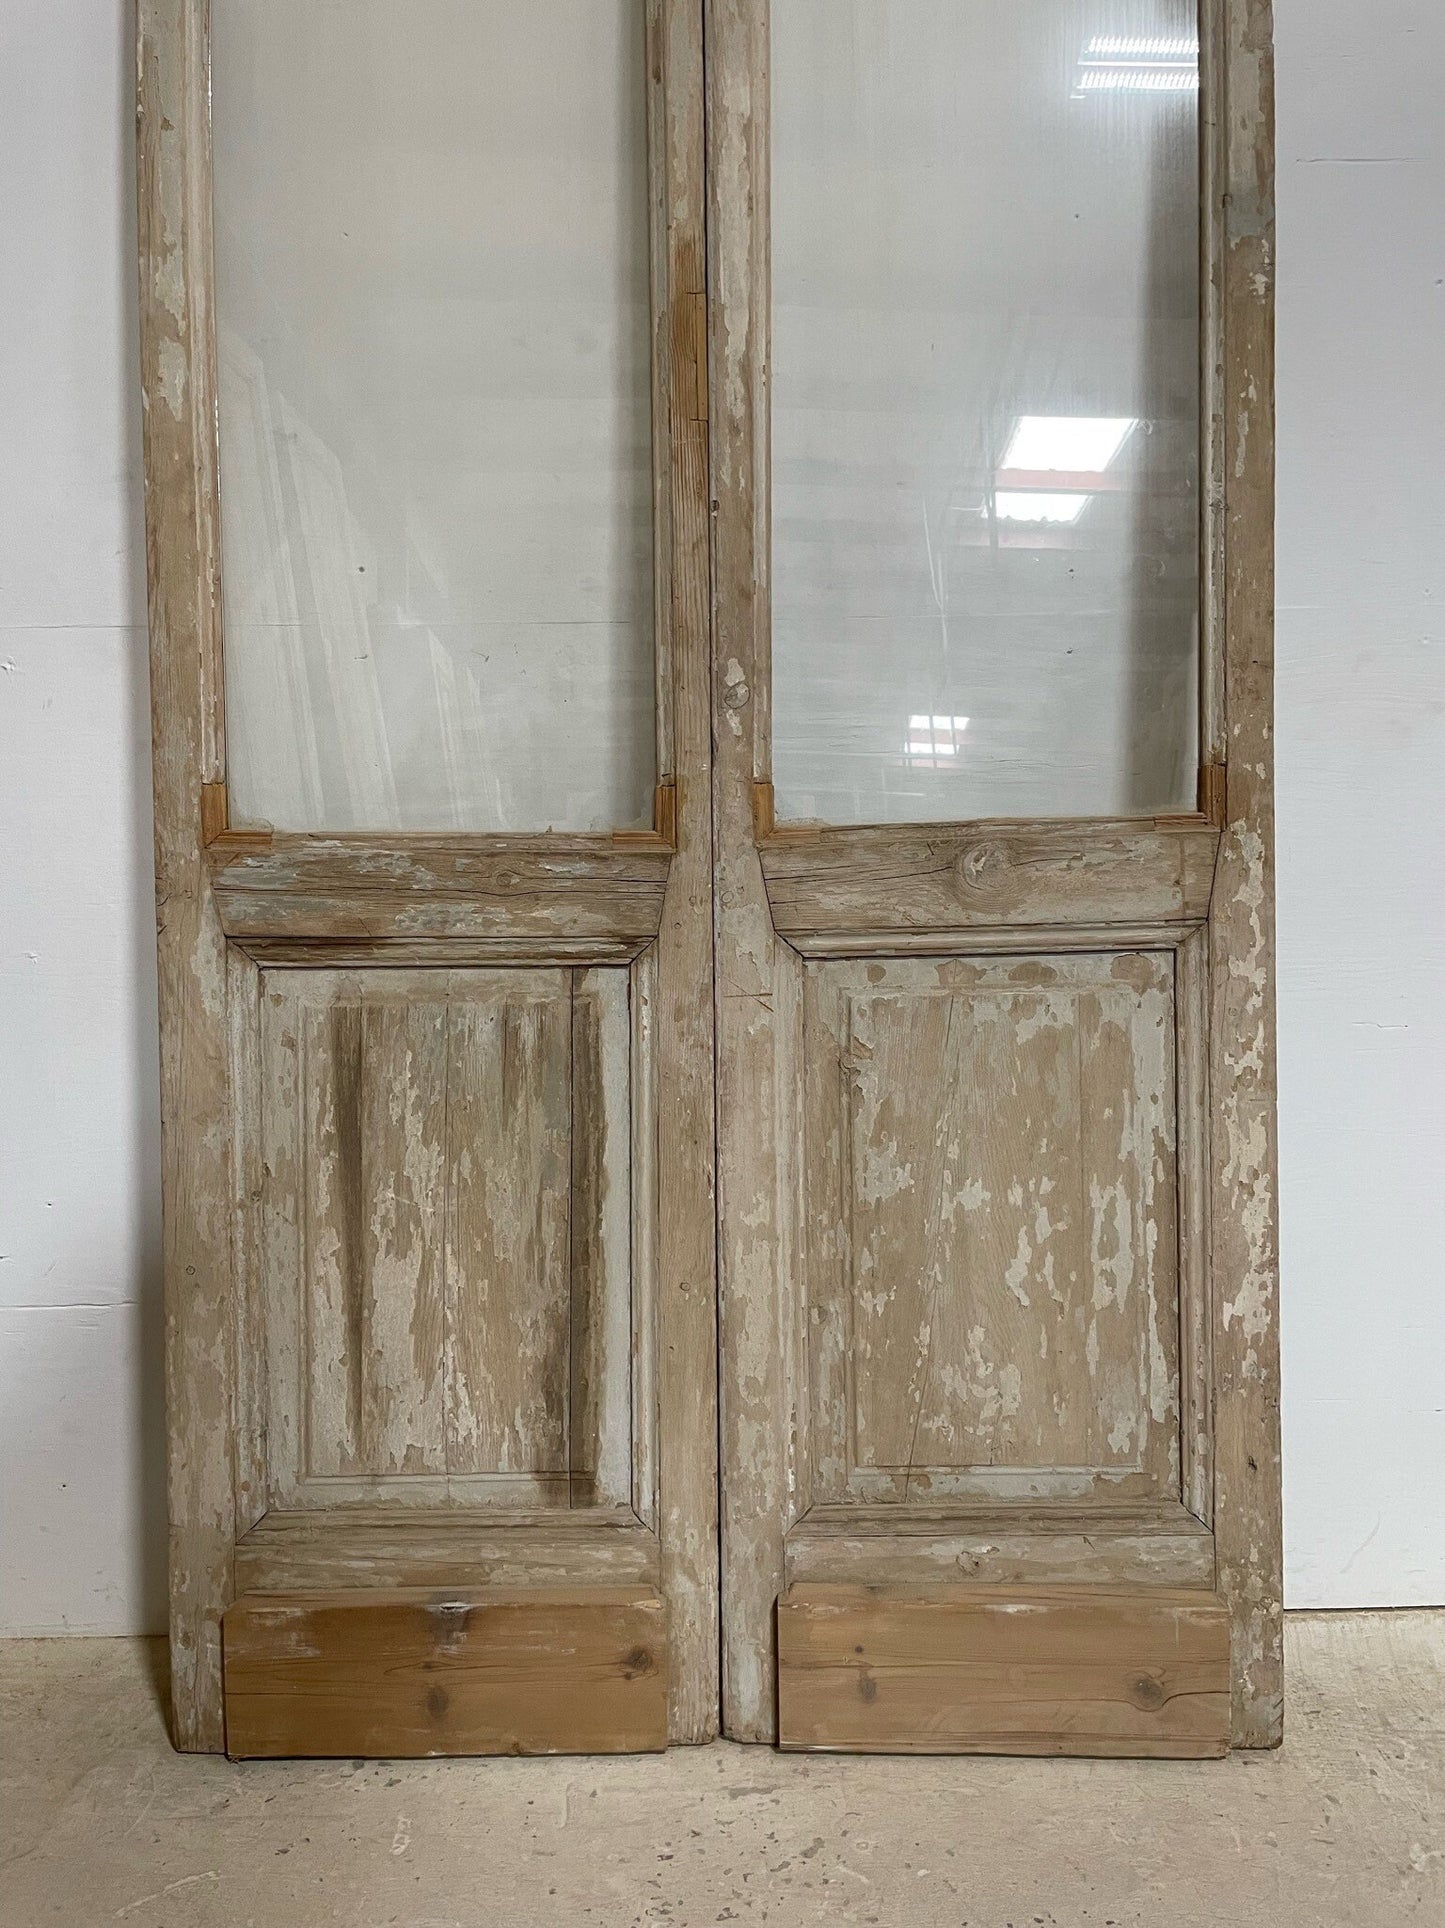 Antique French door (94.75x46.25) with glass F0311